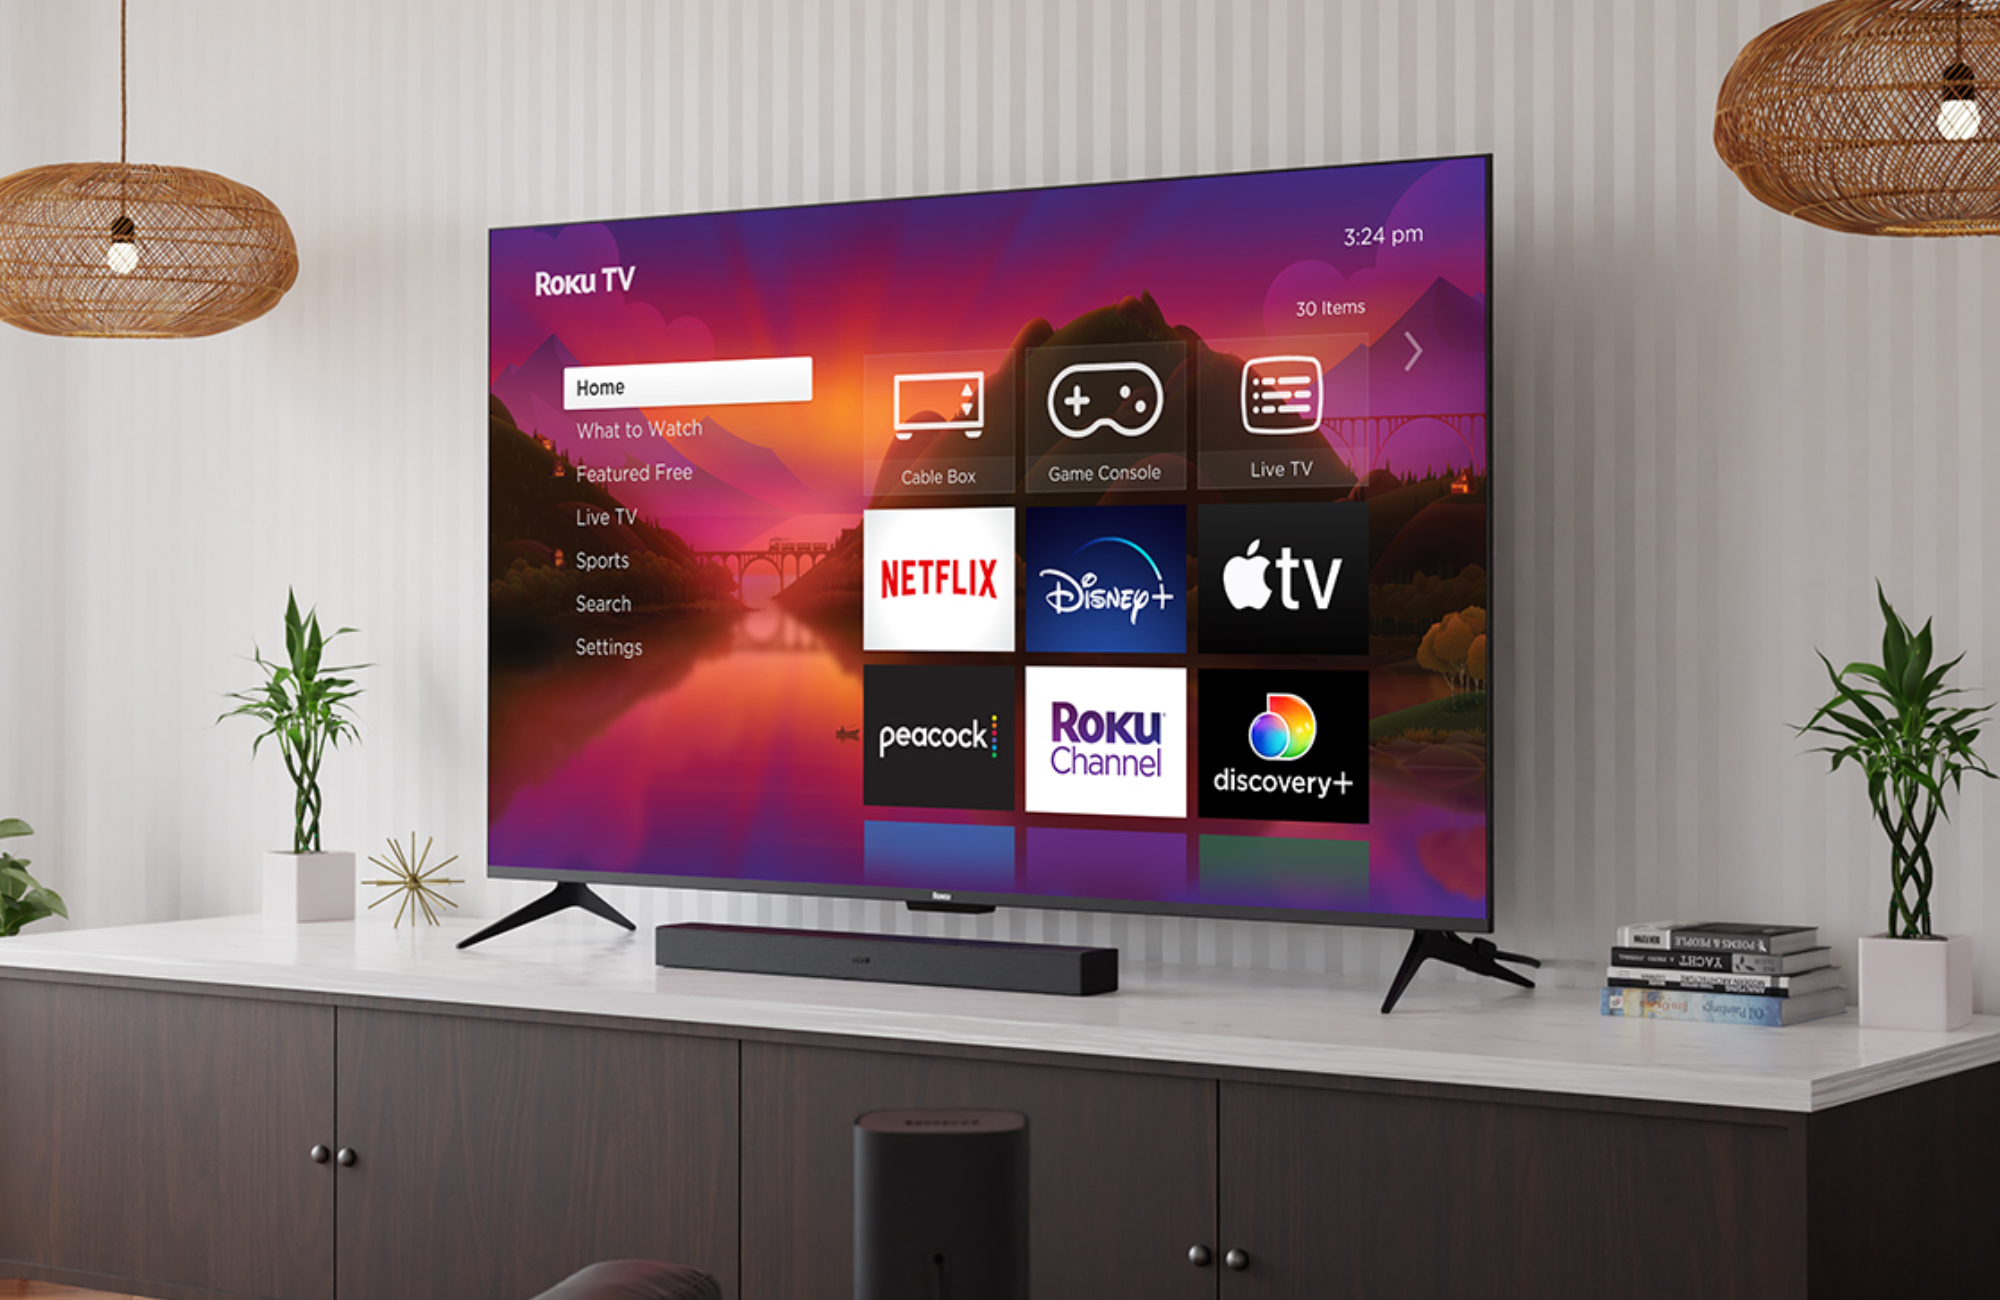 You can preorder Roku’s Select and Plus TVs at Best Buy today